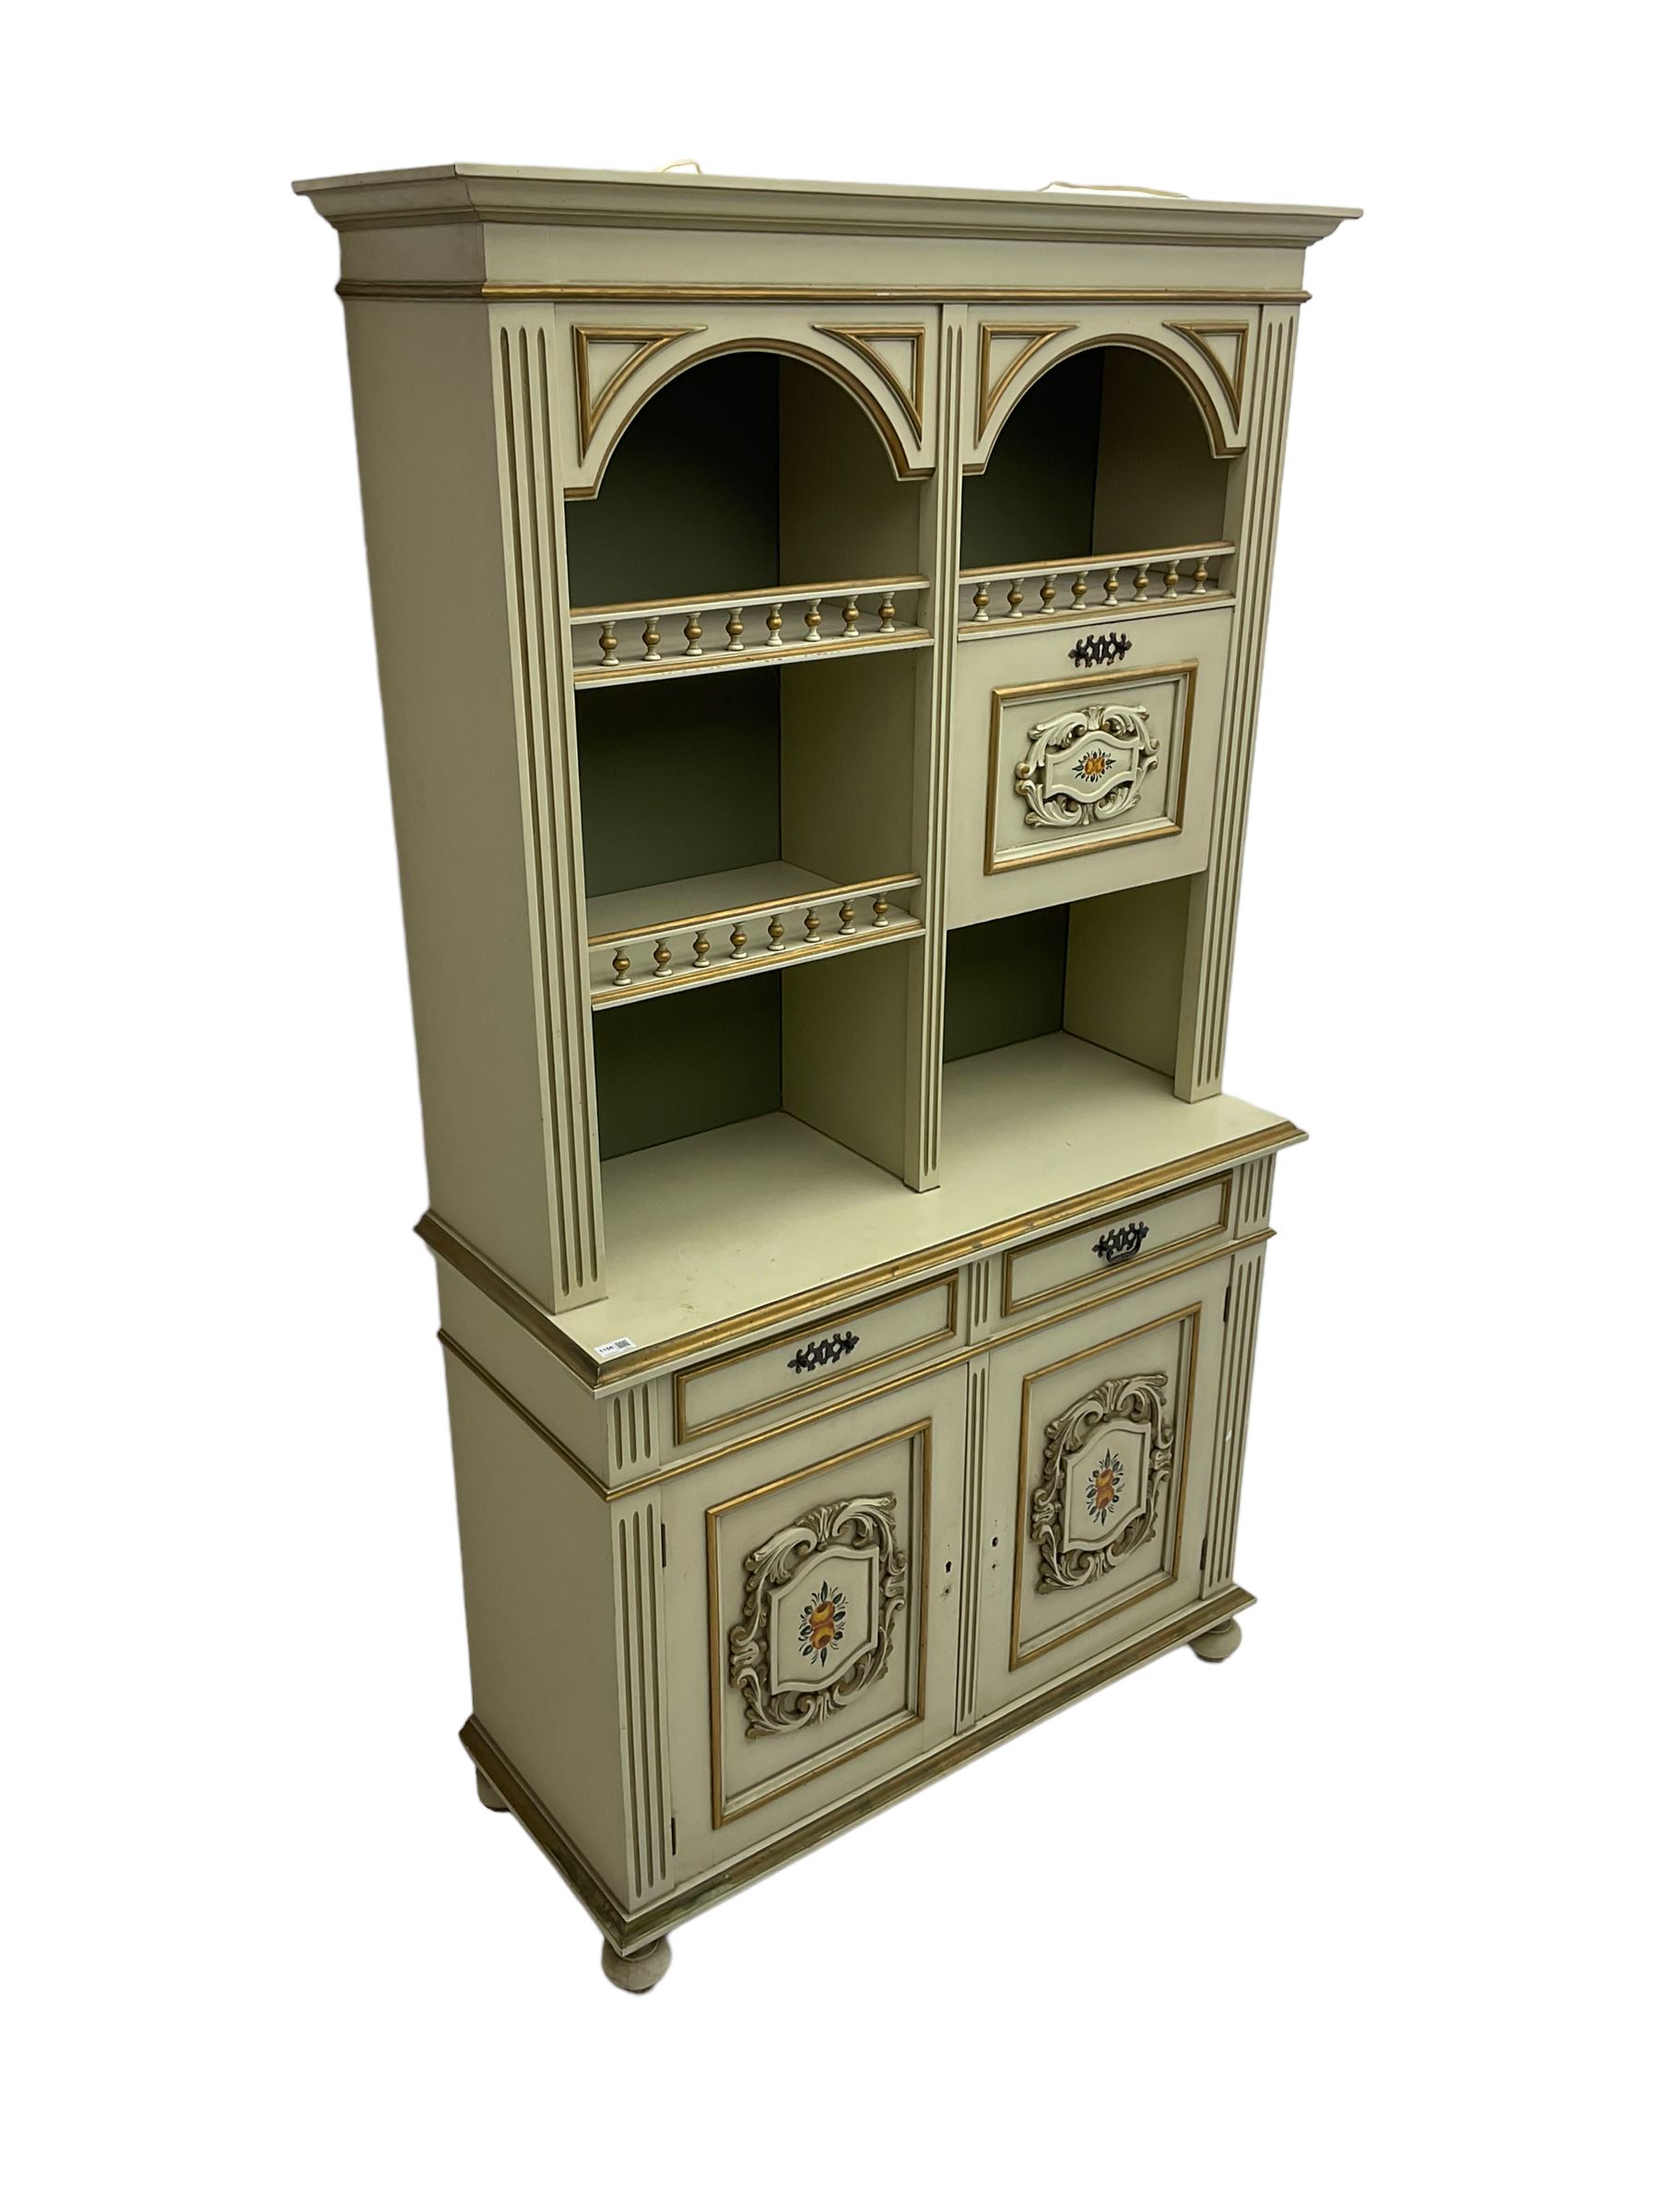 Portuguese painted dresser - Image 4 of 6